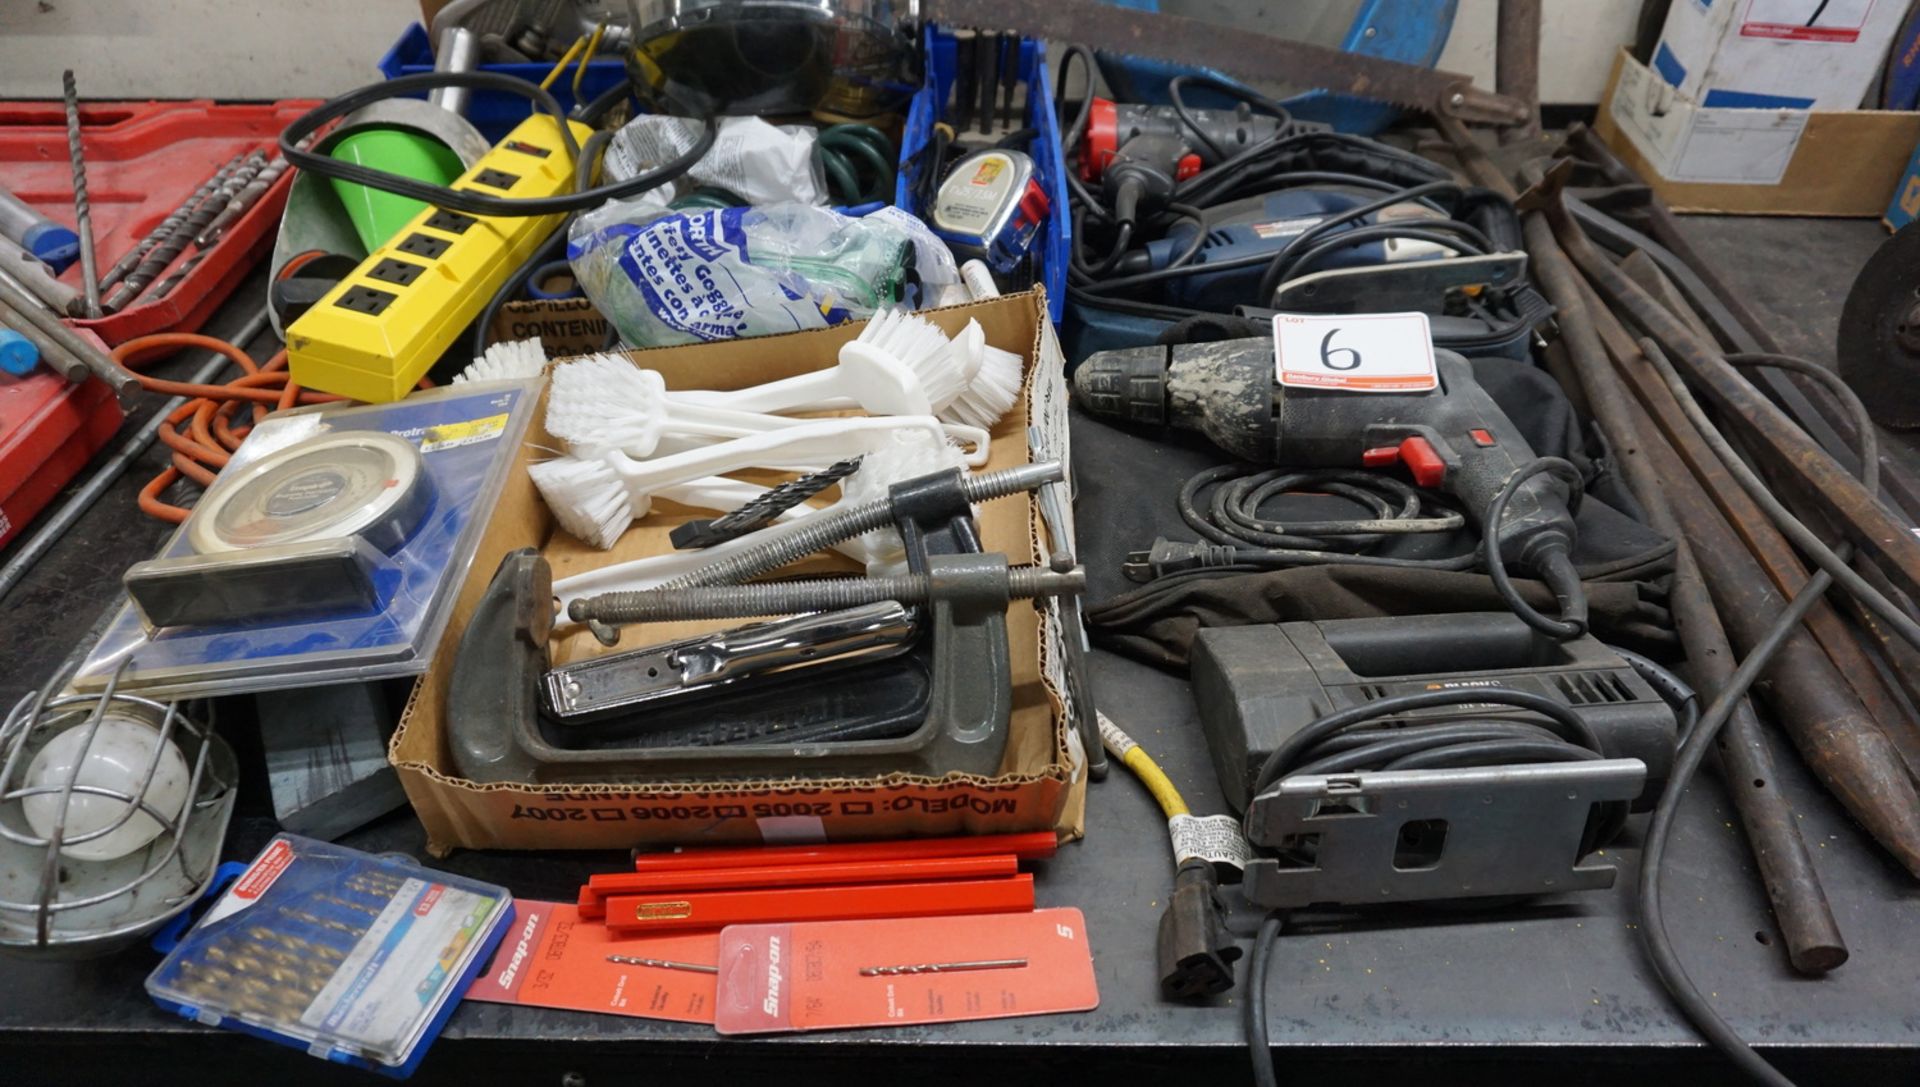 LOT - ASSTD HAND TOOLS, JIG SAWS, CLAMPS, DRY BARS, ETC - Image 2 of 3